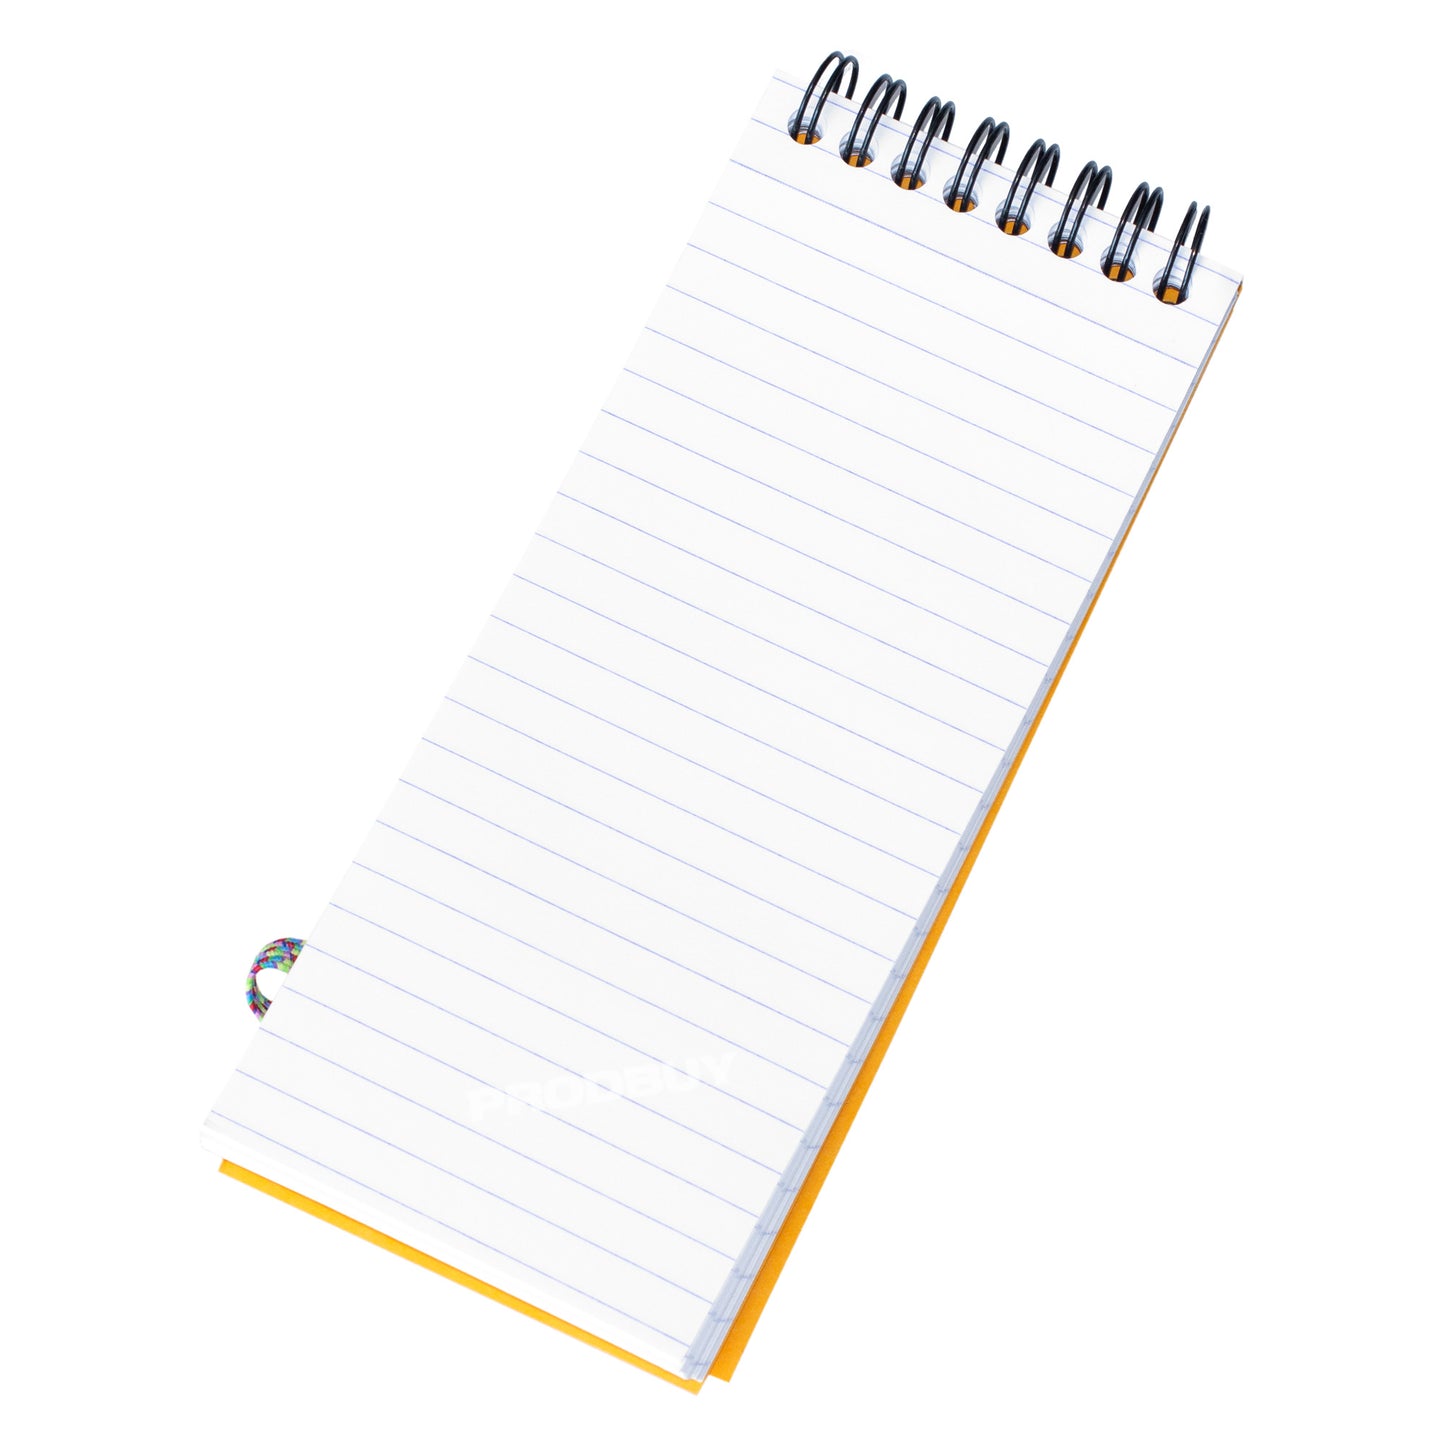 Spiral Shopping To Do List Notepad